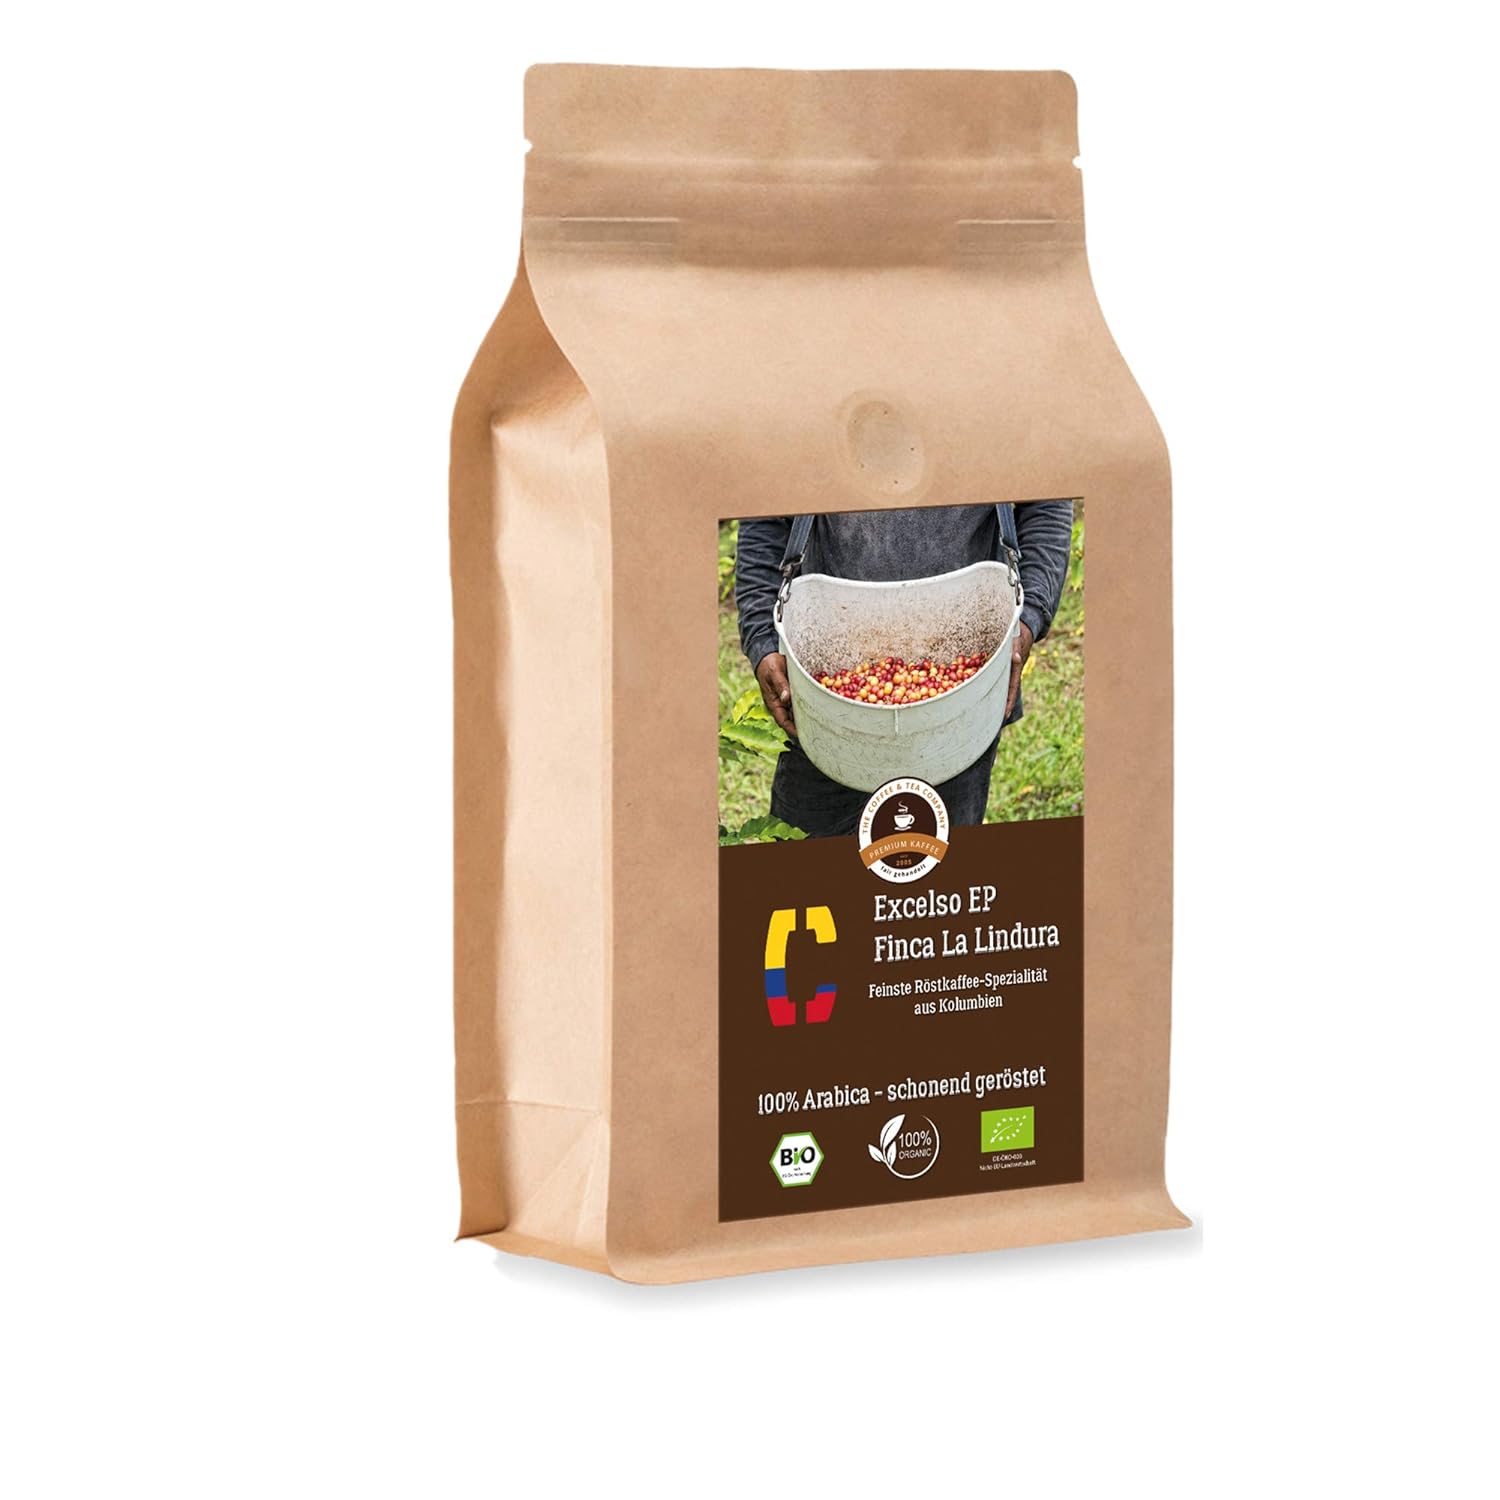 Coffee Globetrotter - Bio Colombia Excelso EP Finca la Lindura - 1000 g Coarse Painting - for Fully Automatic Coffee Grinder, Hand Mill - Top Coffee - Roasted Coffee from Organic Cultivation